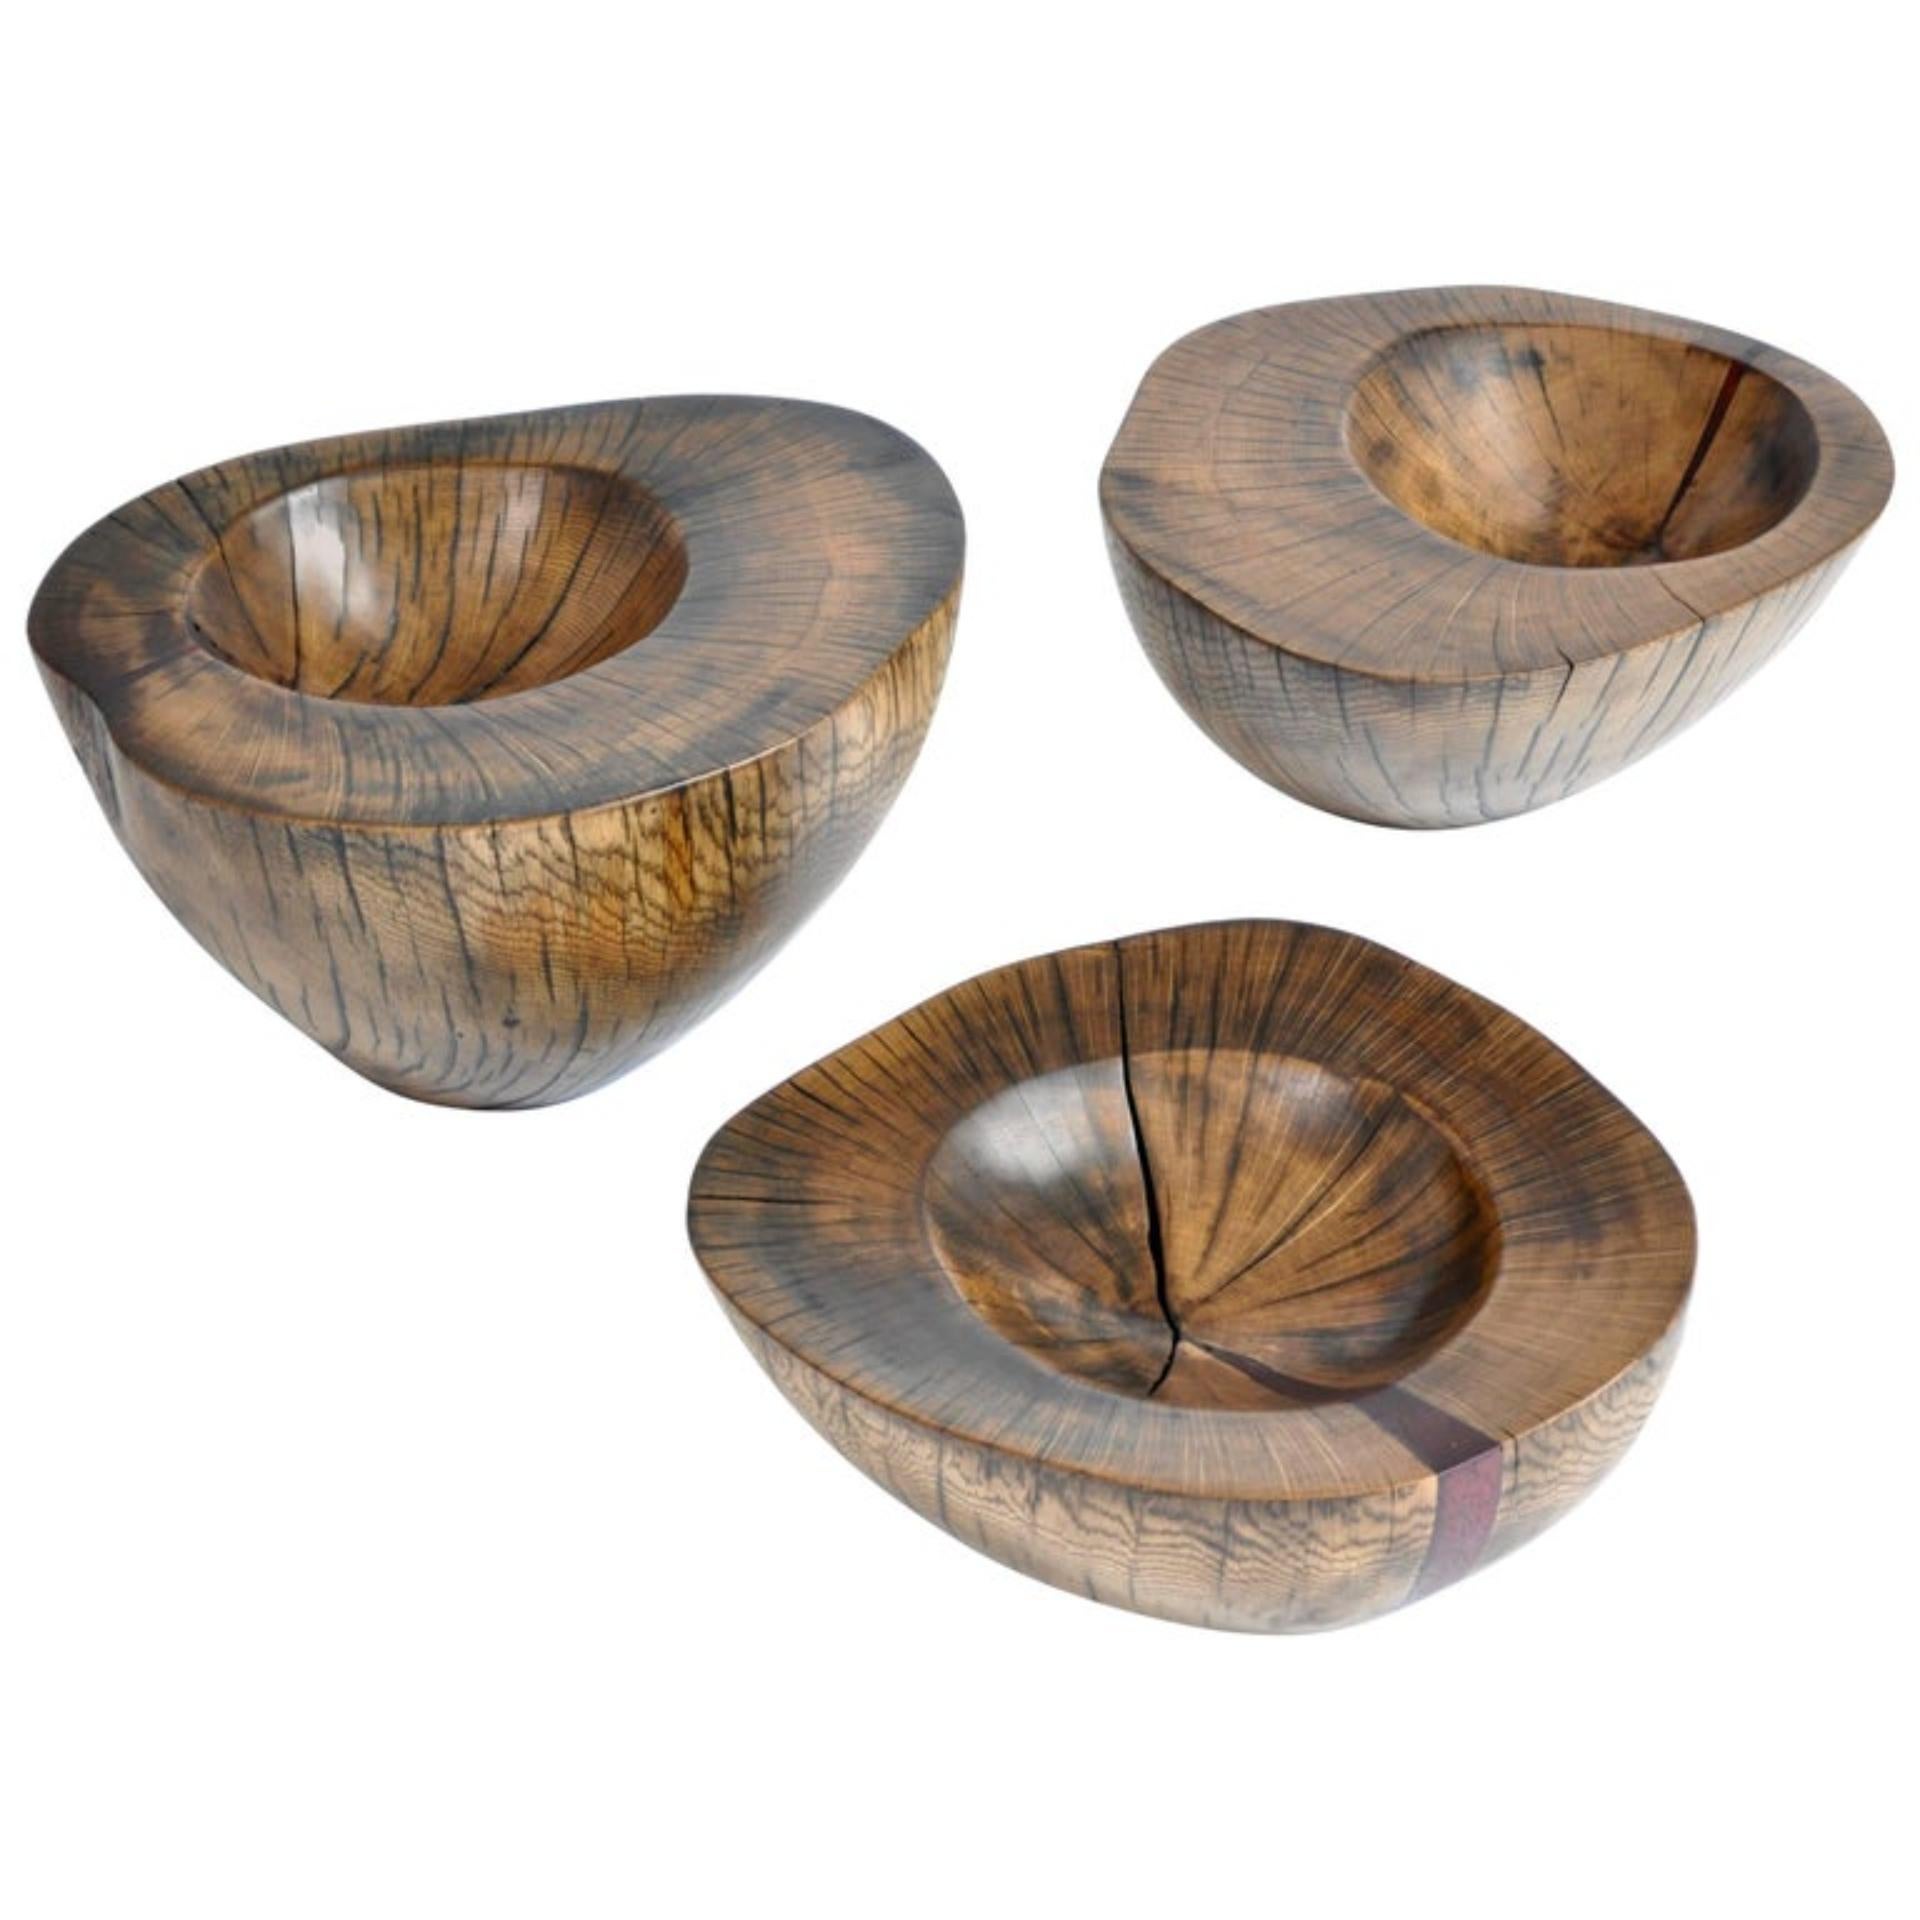 Unique signed bowls by Jörg Pietschmann
Bowls: oak, padouk, ebonized · V1285
Measures: H 26, 20, 16 Ø 50, 47, 48 cm
Three bowls made from a large branch of a fallen majestic oak tree,
with a insert from padouk.
Polished oil finish.

In